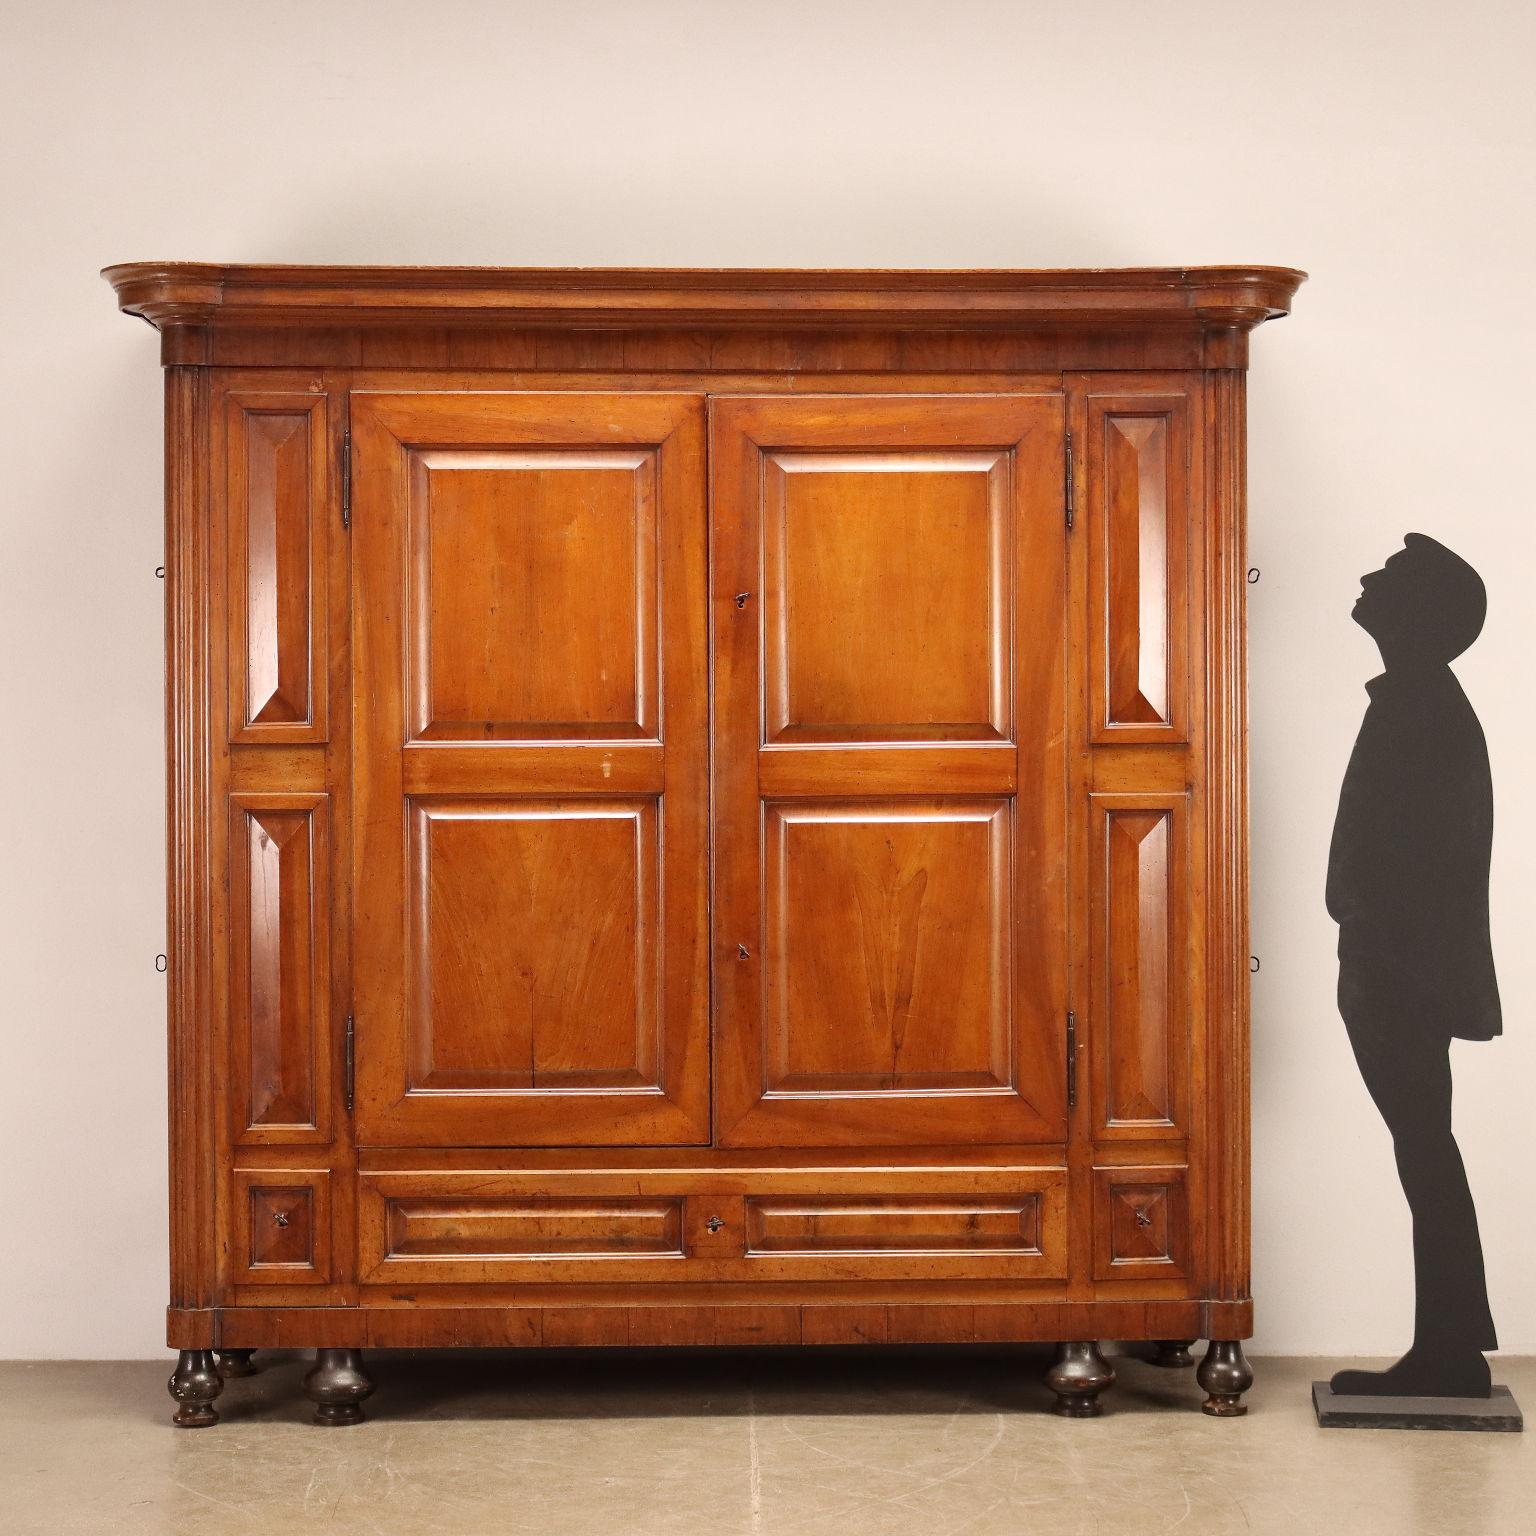 Empire wardrobe in walnut, Italy, first quarter of the 19th century. Molded frieze, front with a pair of doors and lower band with 3 drawers, tapered columns on the uprights, sides house 4 pantry compartments, turned feet. Base and top are connected